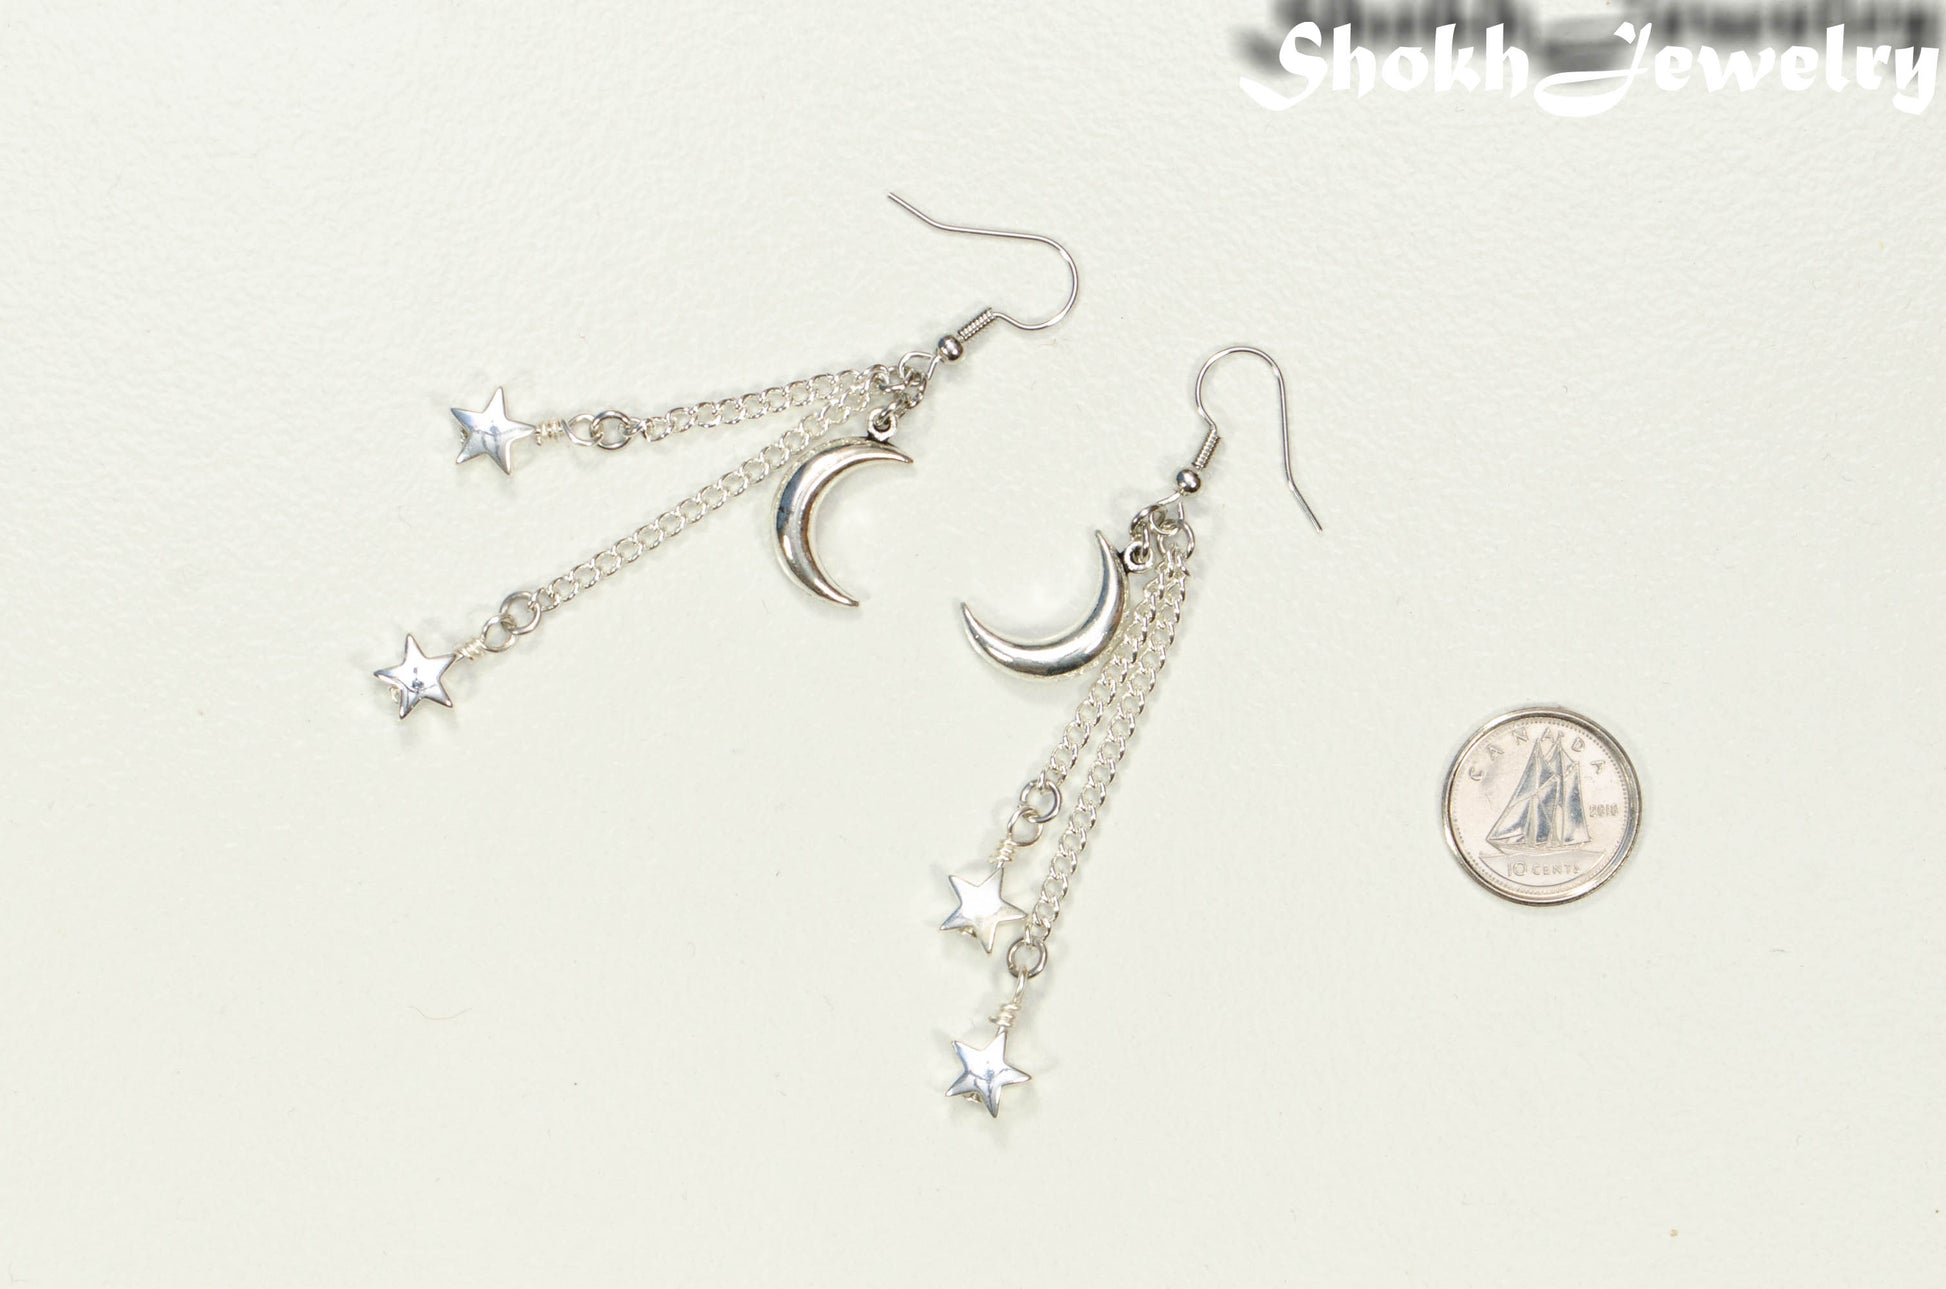 Long Crescent Moon and Hematite Star Earrings beside a dime.